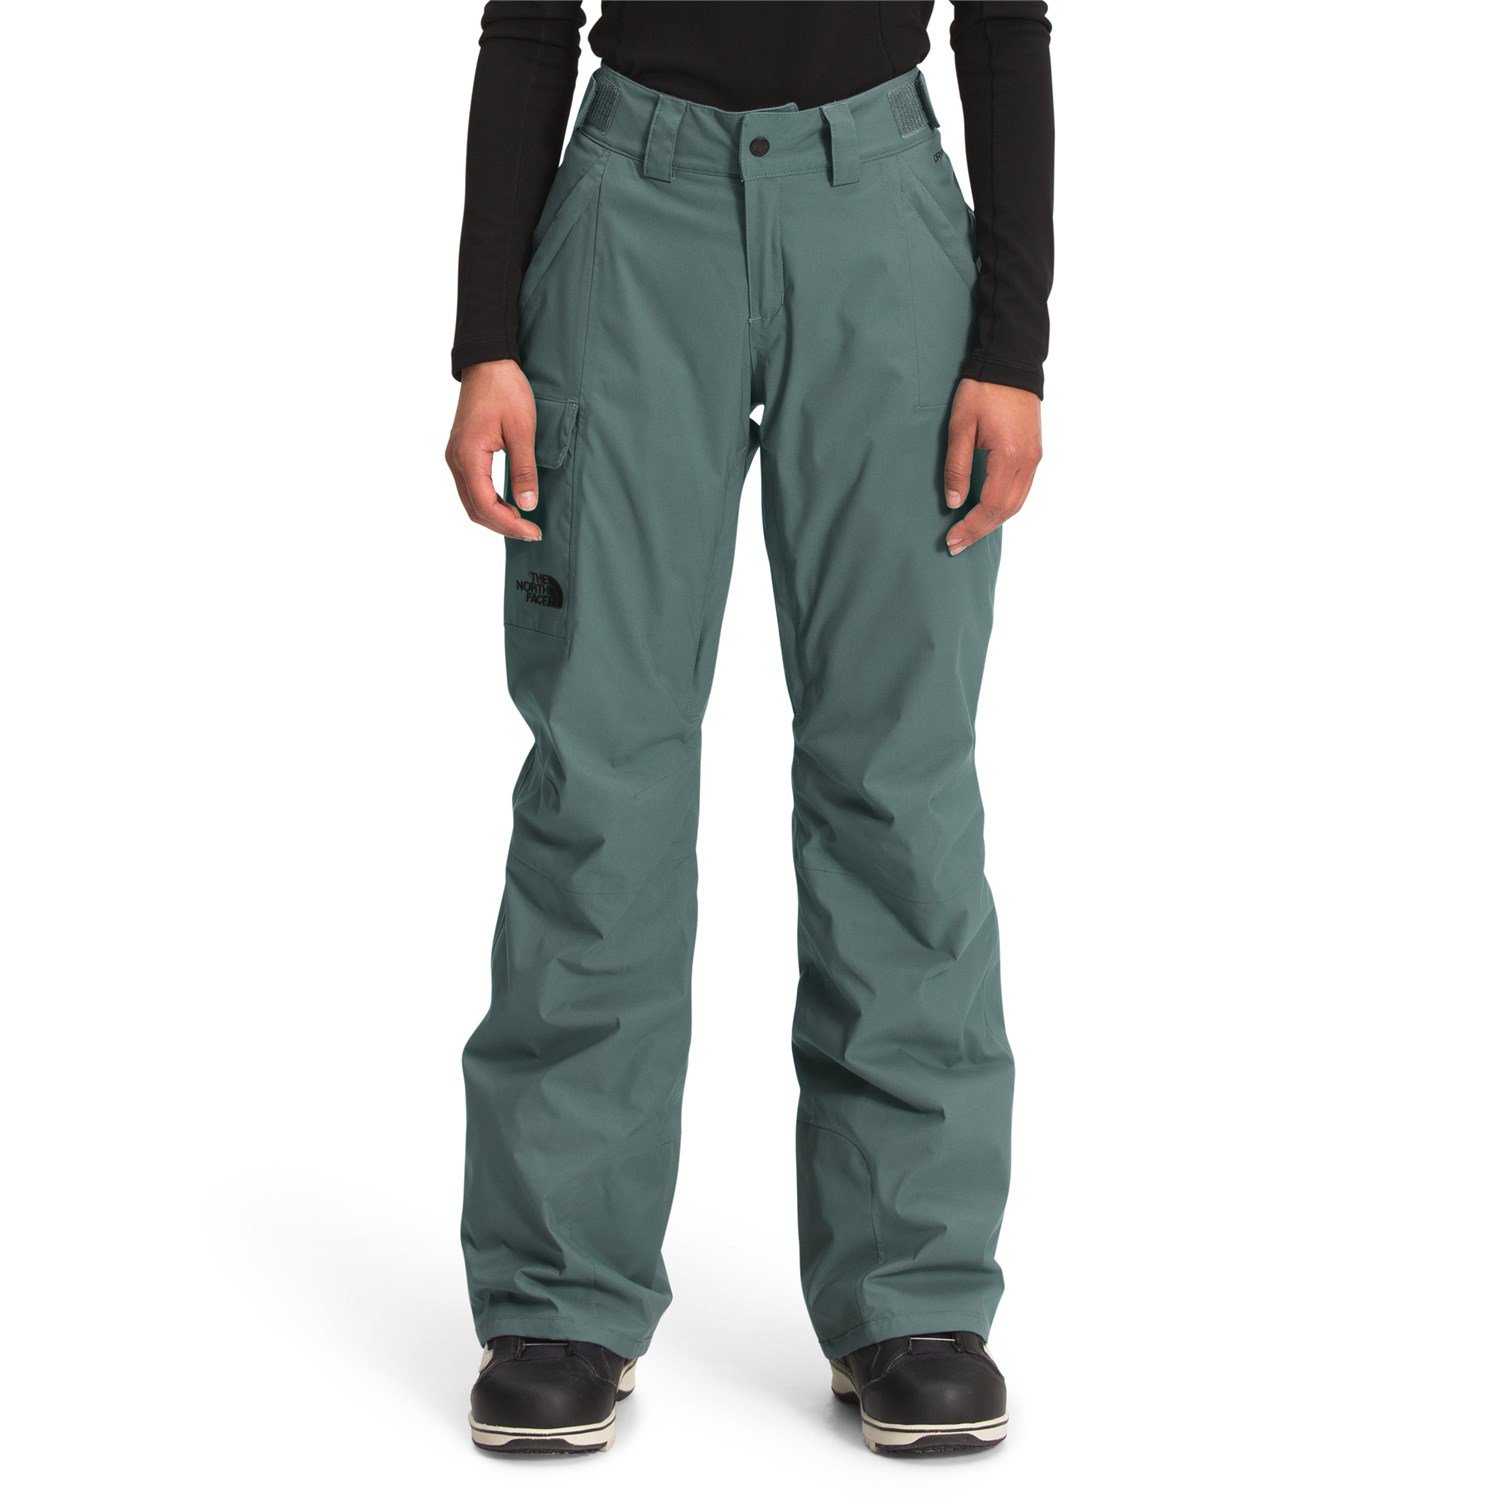 https://images.evo.com/imgp/zoom/203130/831373/the-north-face-freedom-insulated-pants-women-s-.jpg